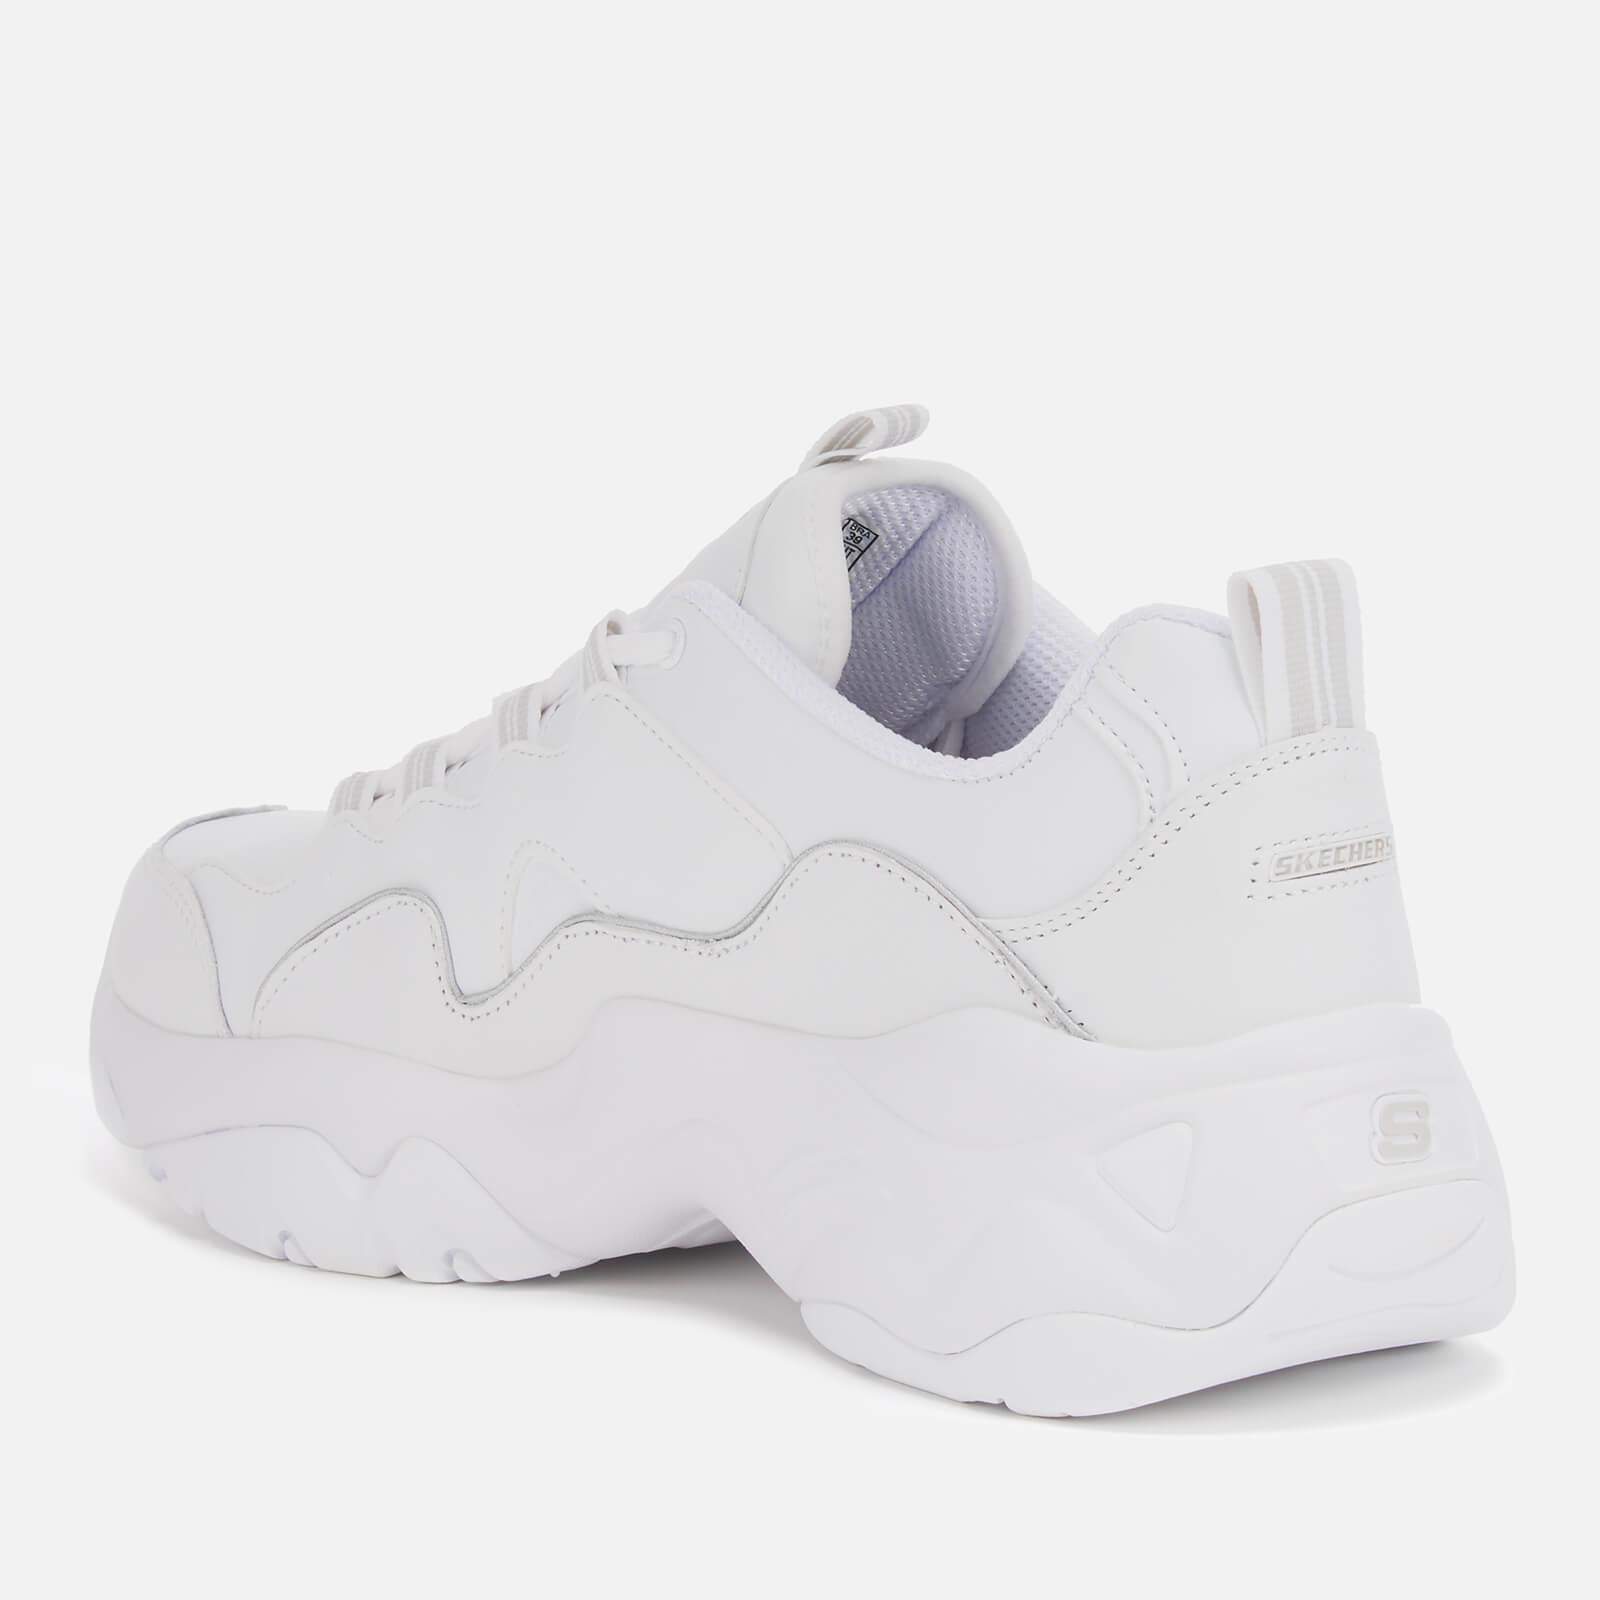 Skechers D'lites 3.0 Proven Force Trainers in White | Lyst Australia